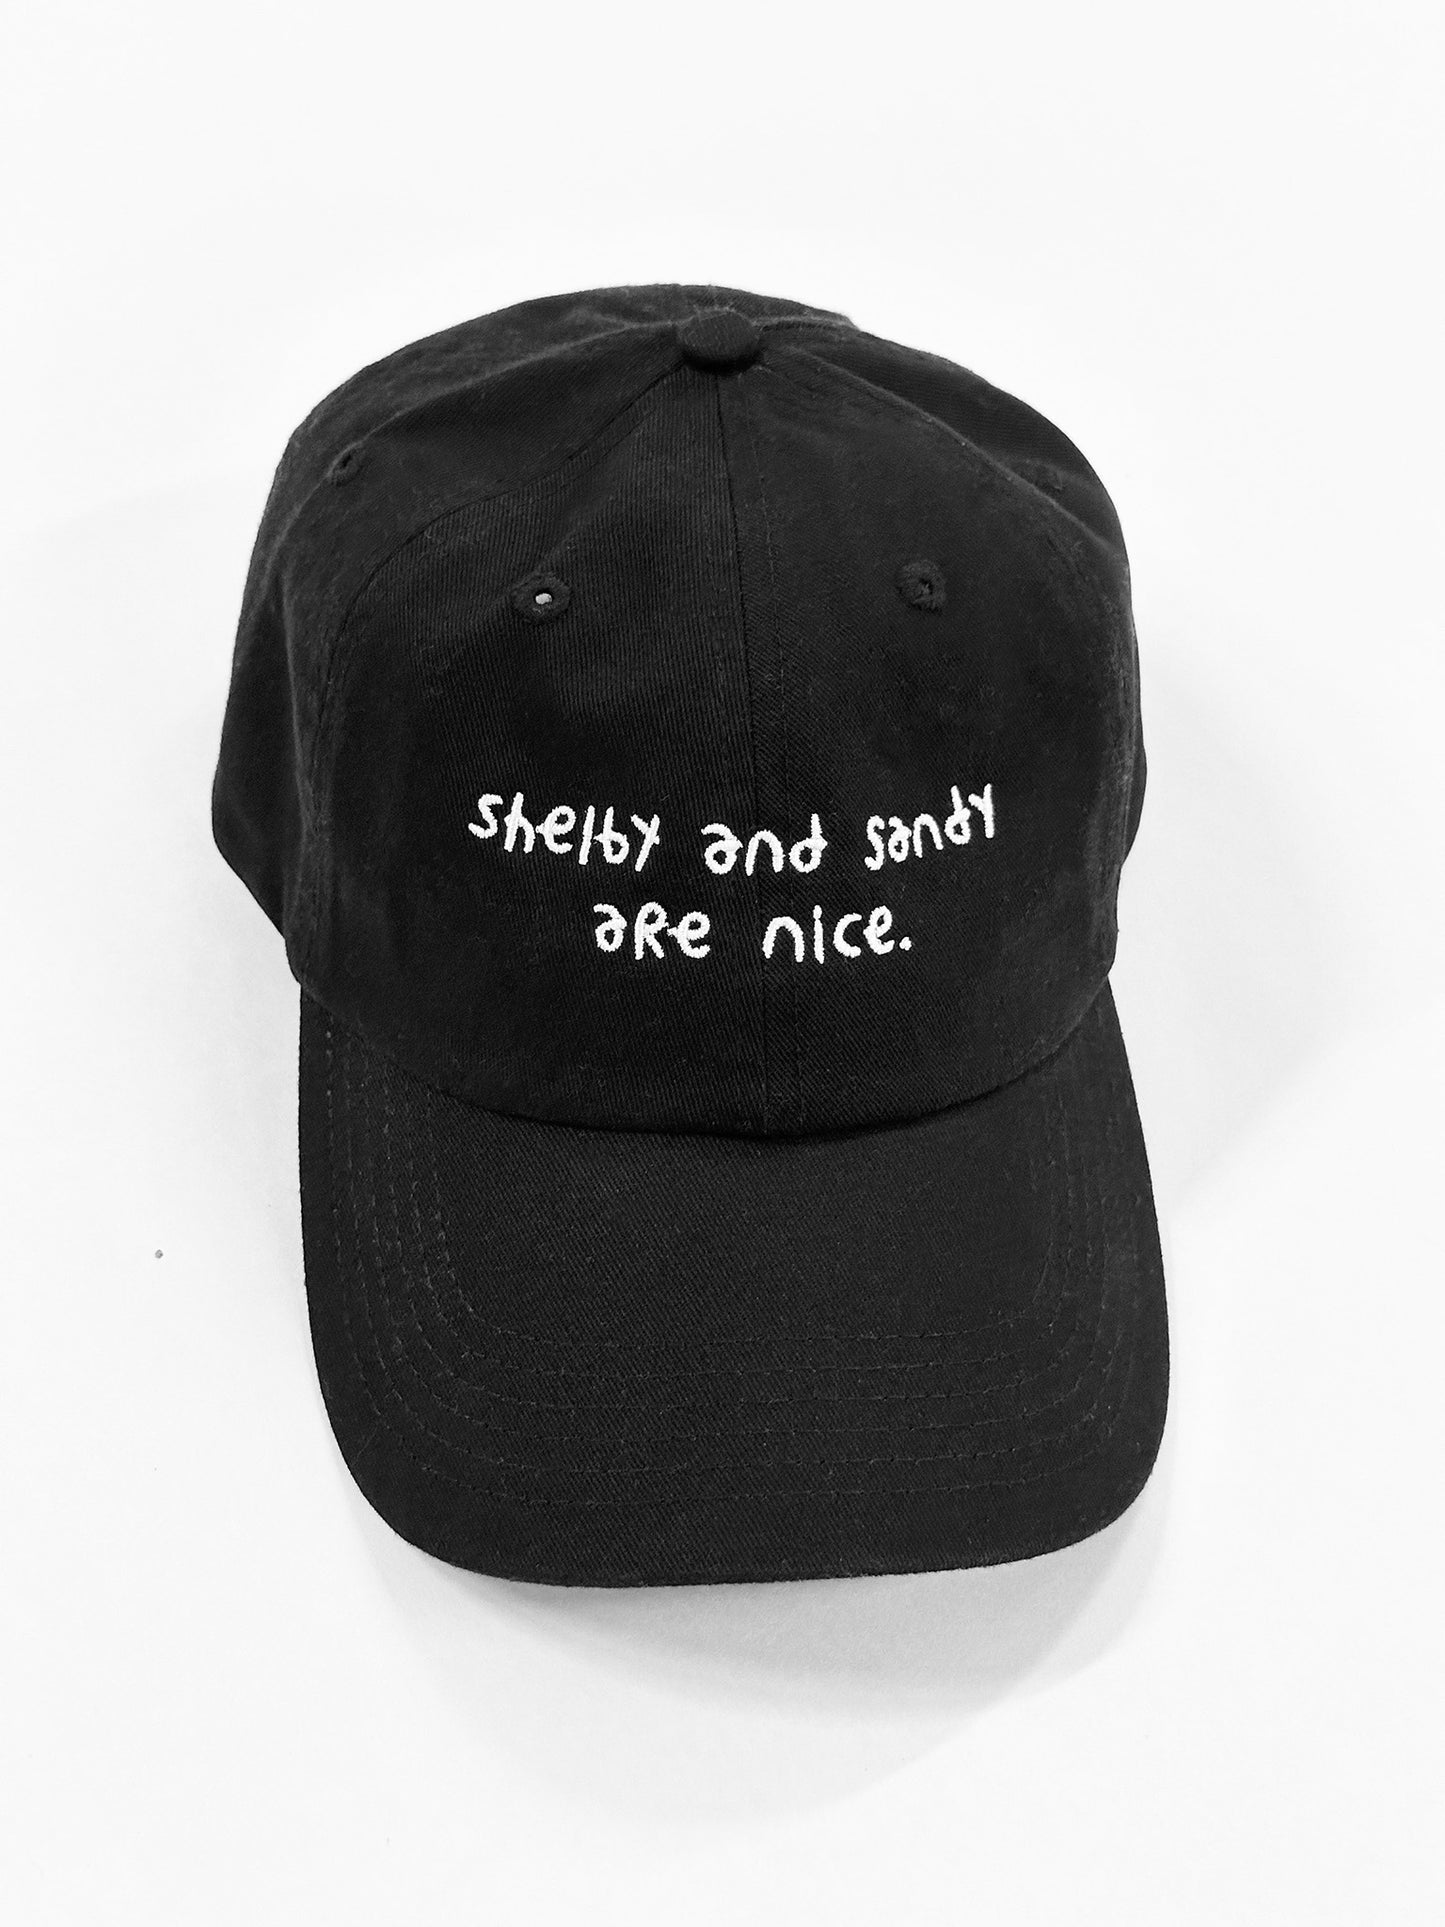 shelby and sandy are nice. - black hat